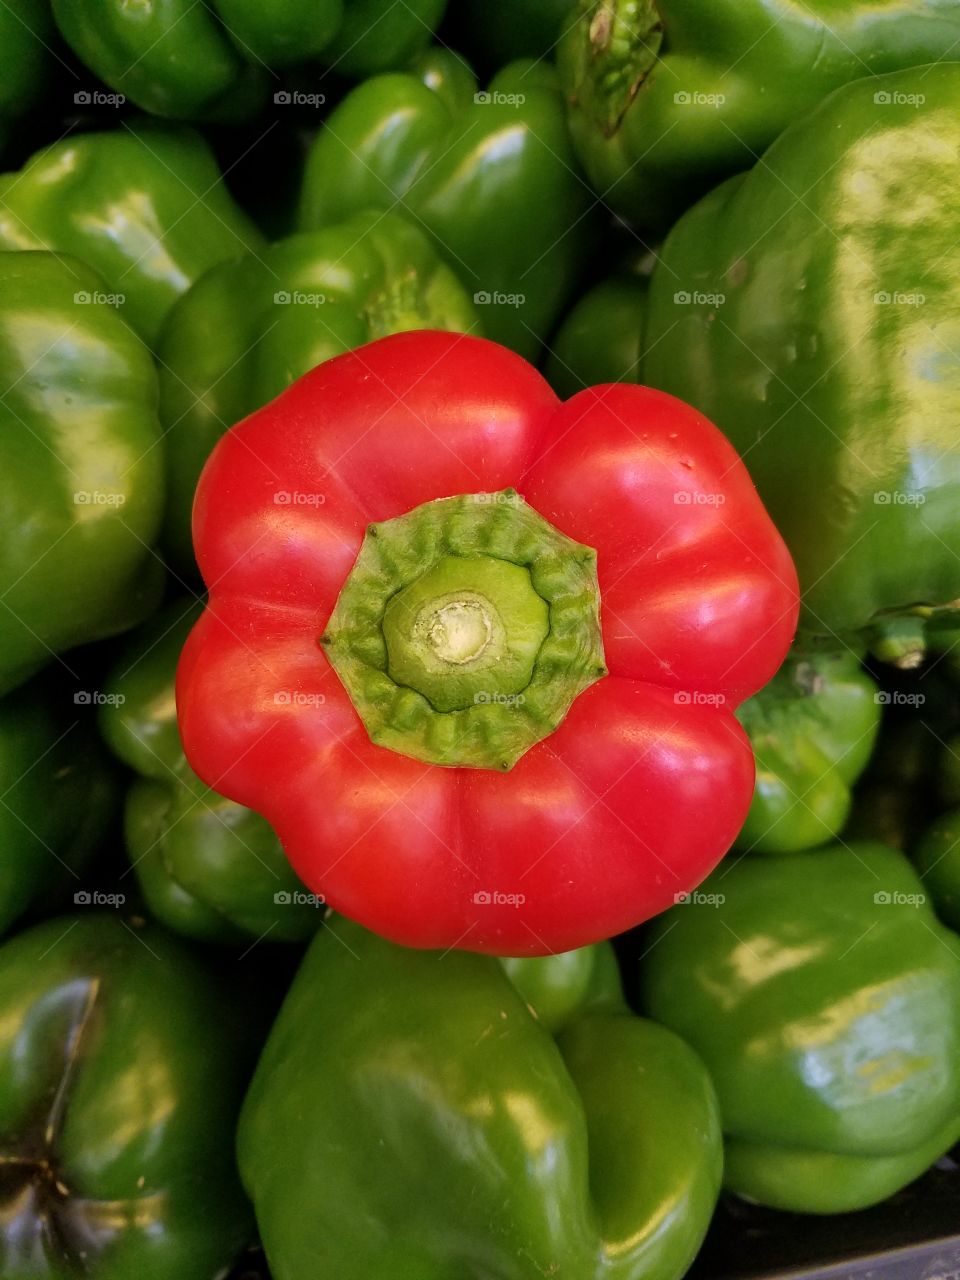 Contrast in Peppers